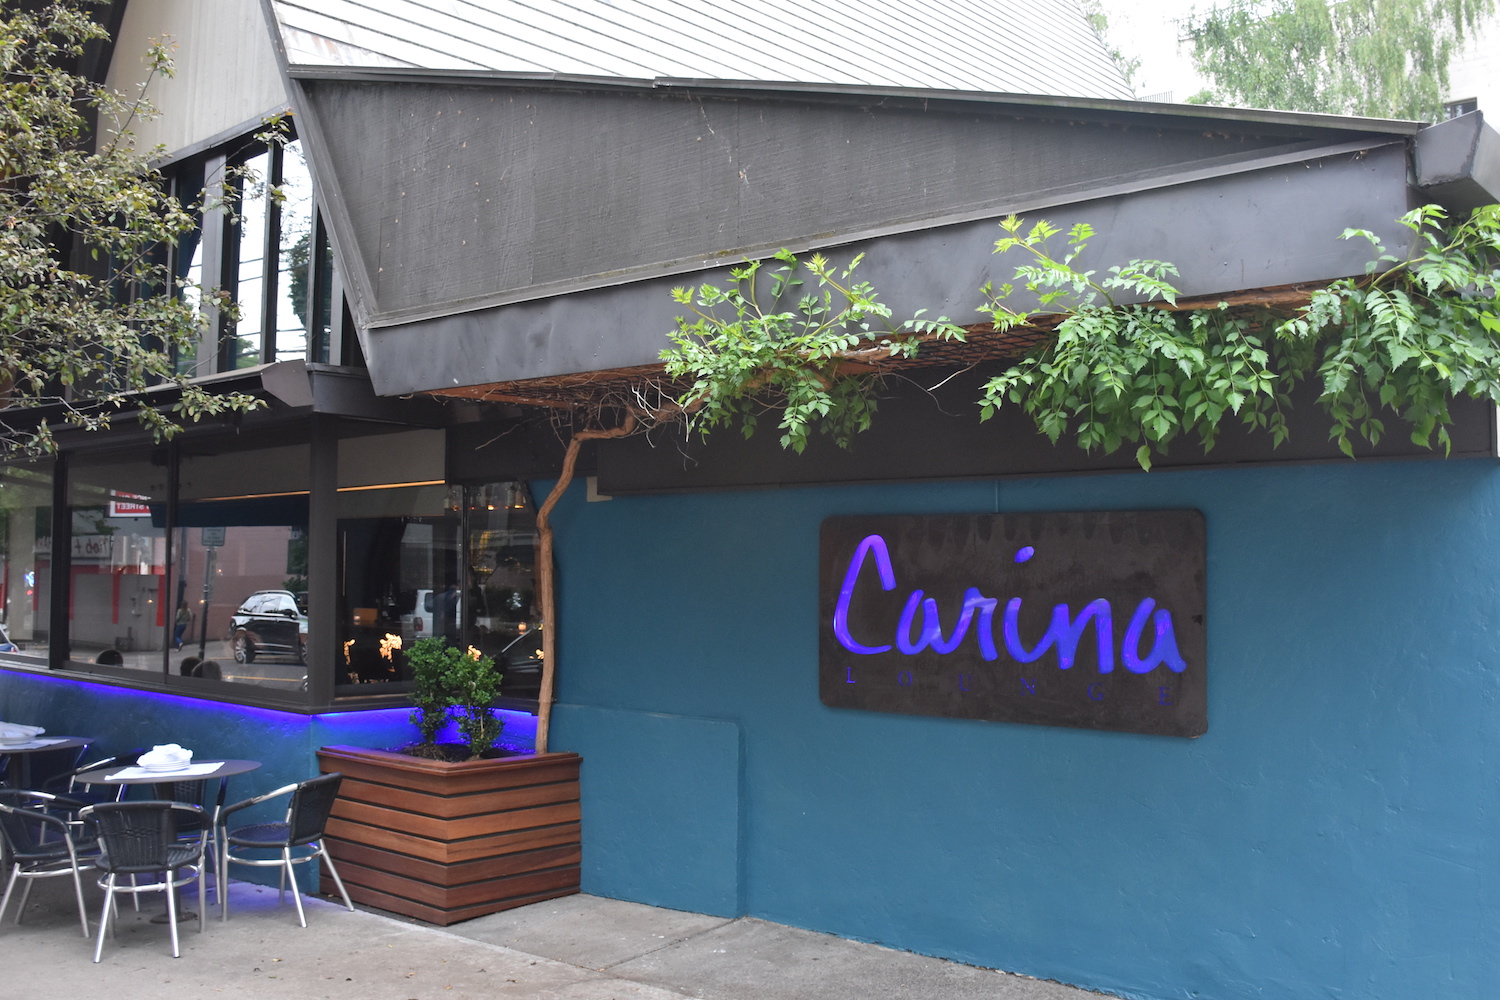 Carina+Lounge+is+a+new+restaurant+located+at+410+N.W.+21st+Ave.